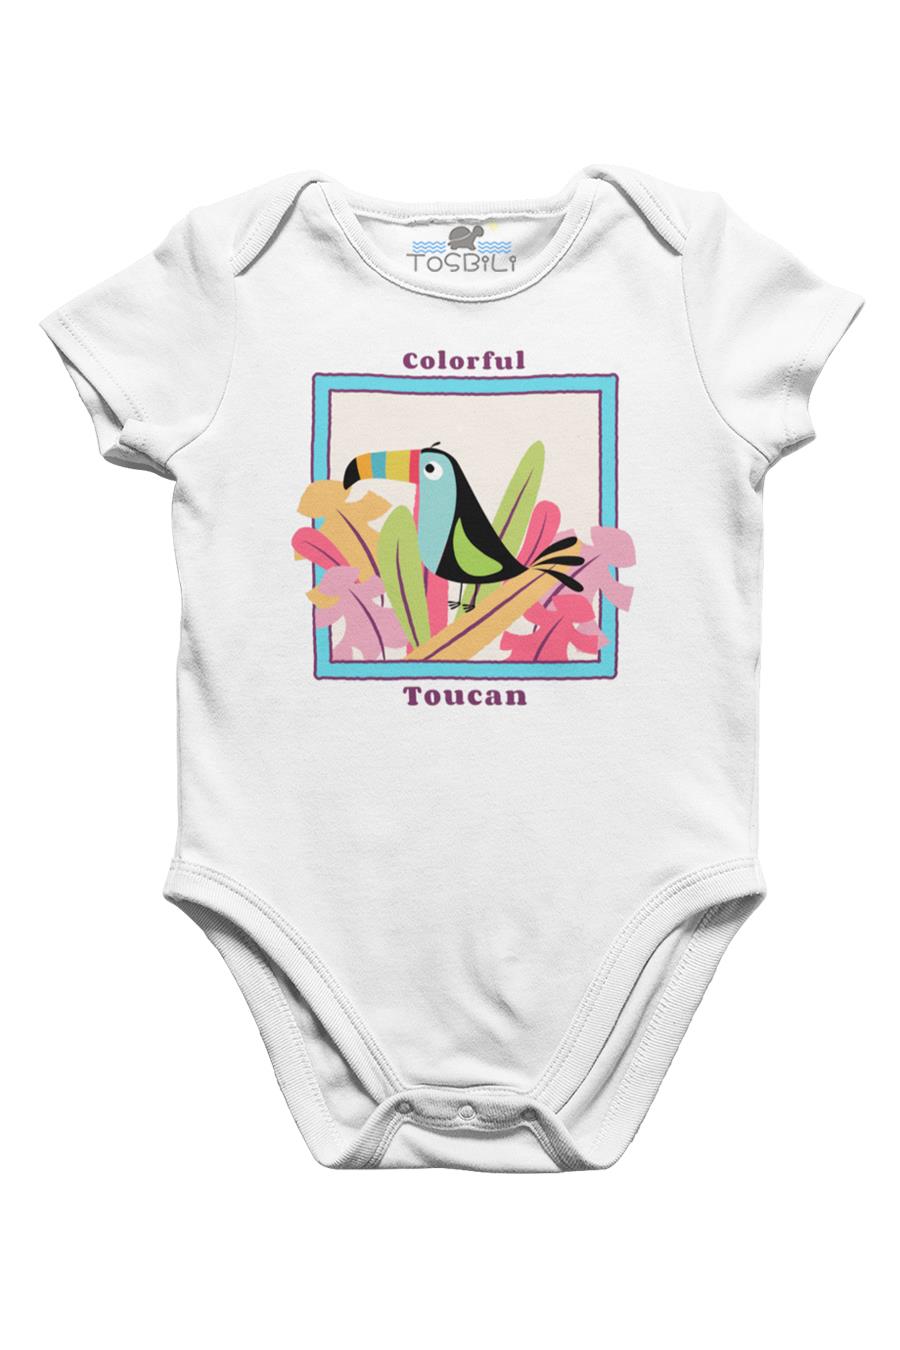 Tosbili Colorful Toucan White Baby Body